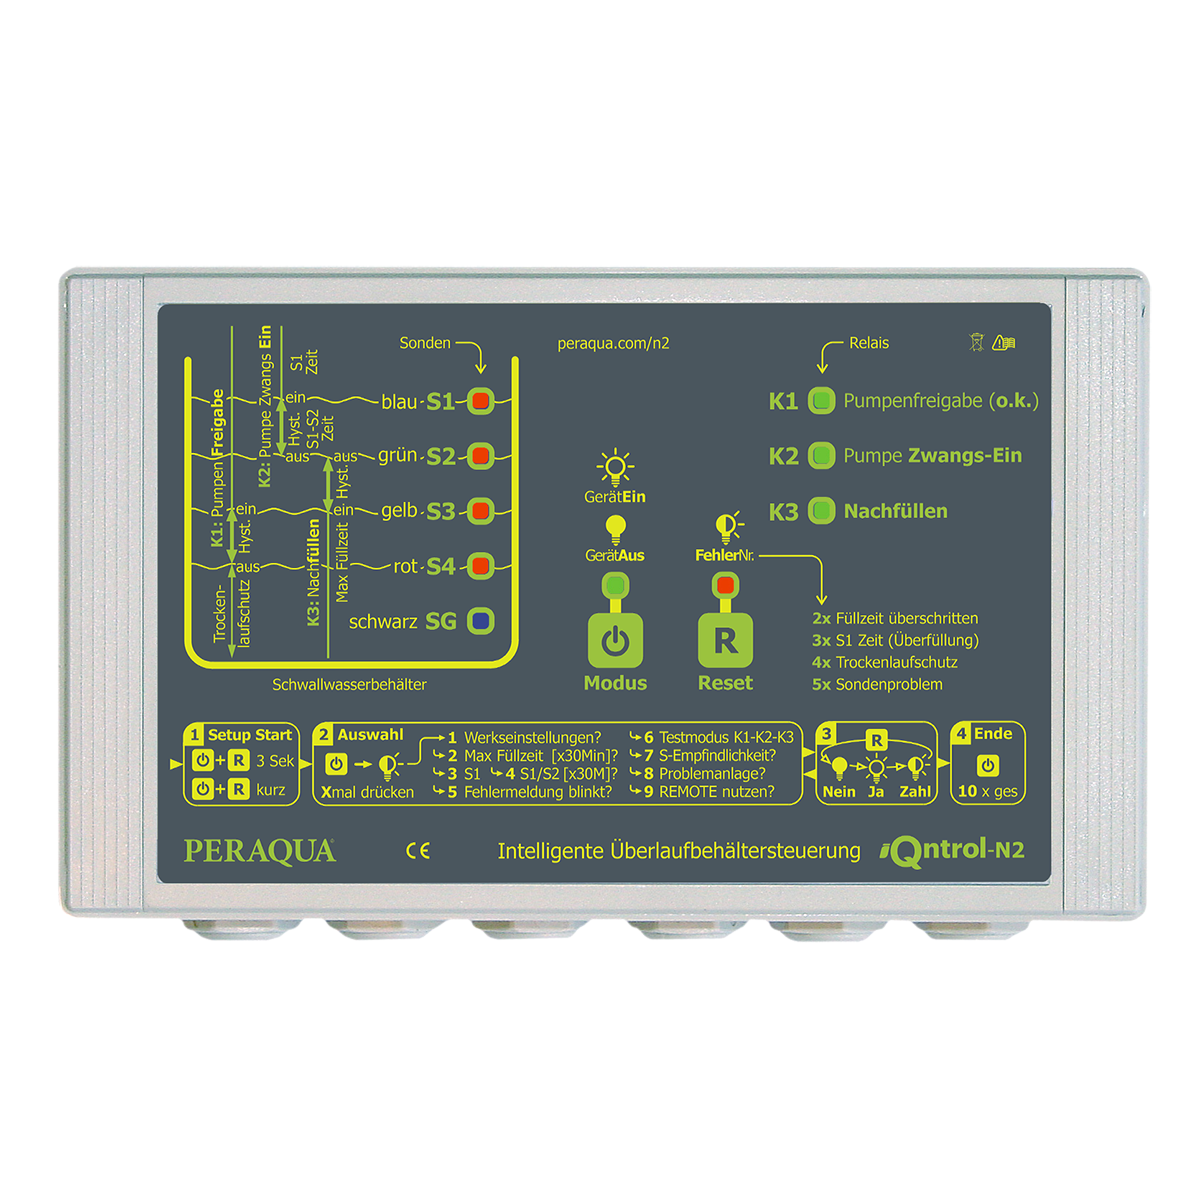 iQntrol-N2 control unit for compensation tank with 3 relays for re-fill, overfill protection and dry run protection iQntrol-N2 control unit for compensation tank with 3 relays for re-fill, overfill protection and dry run protection